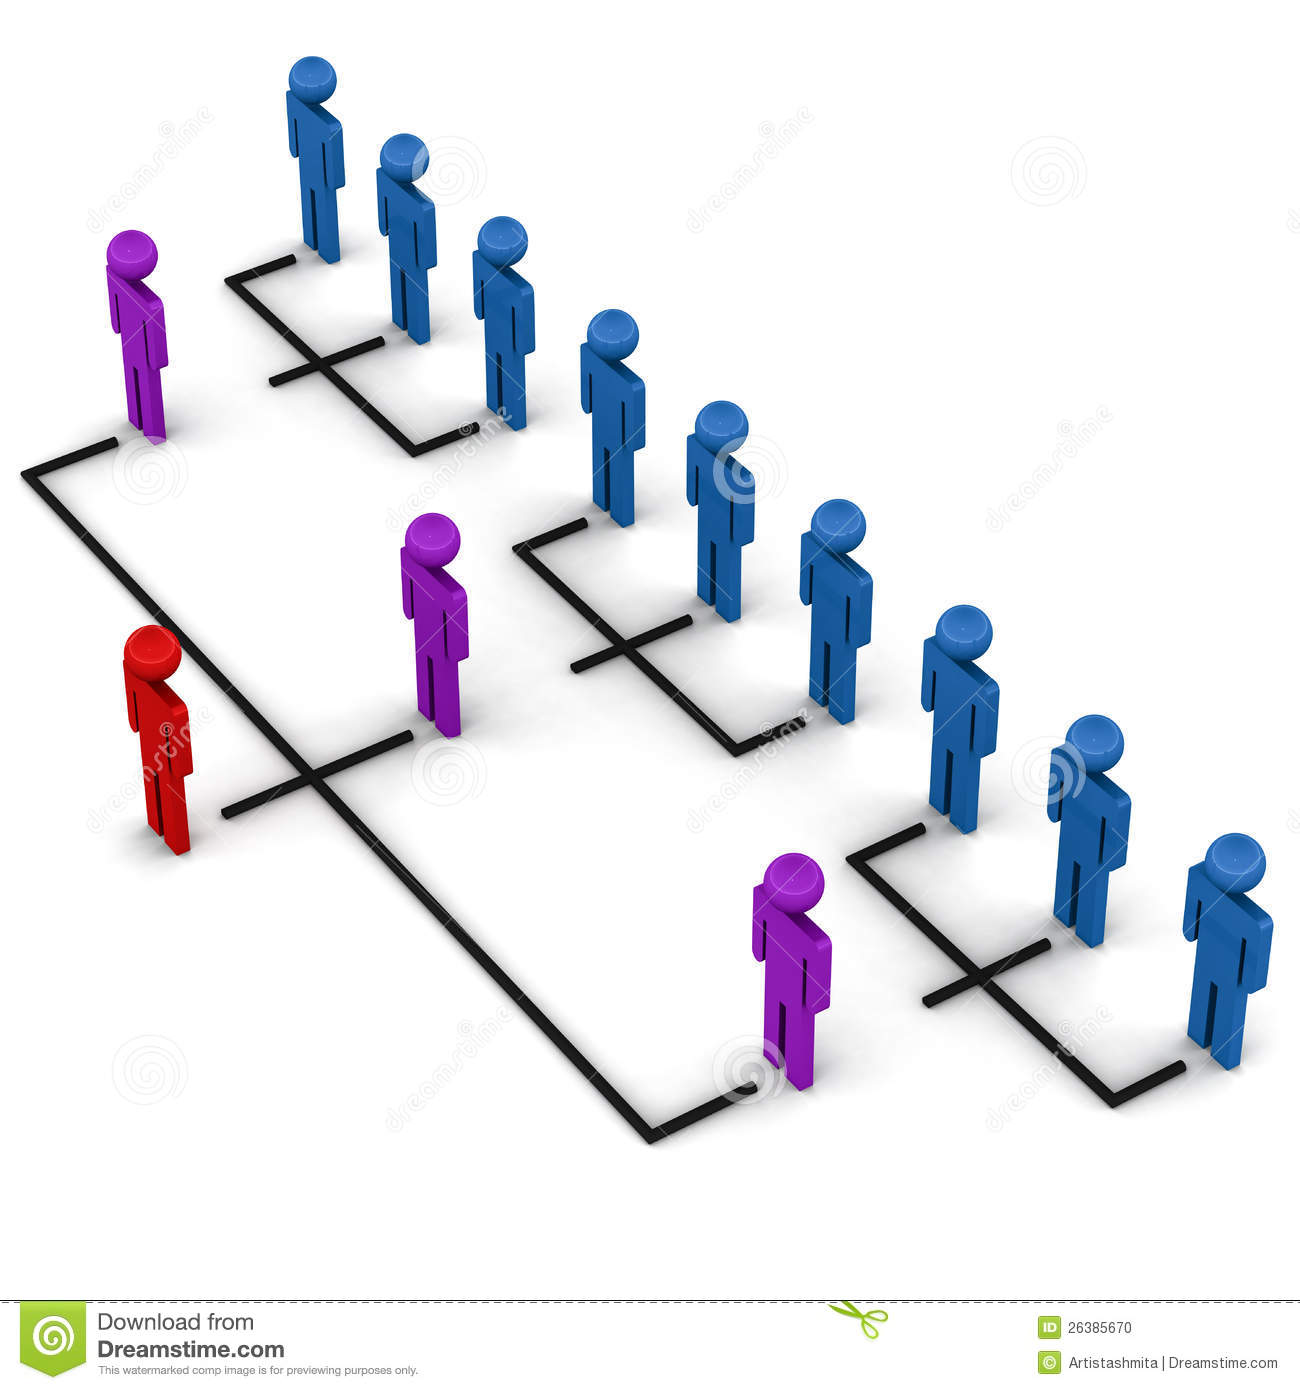 Simple Hierarchy Or Organizational Structure In 3d Figures